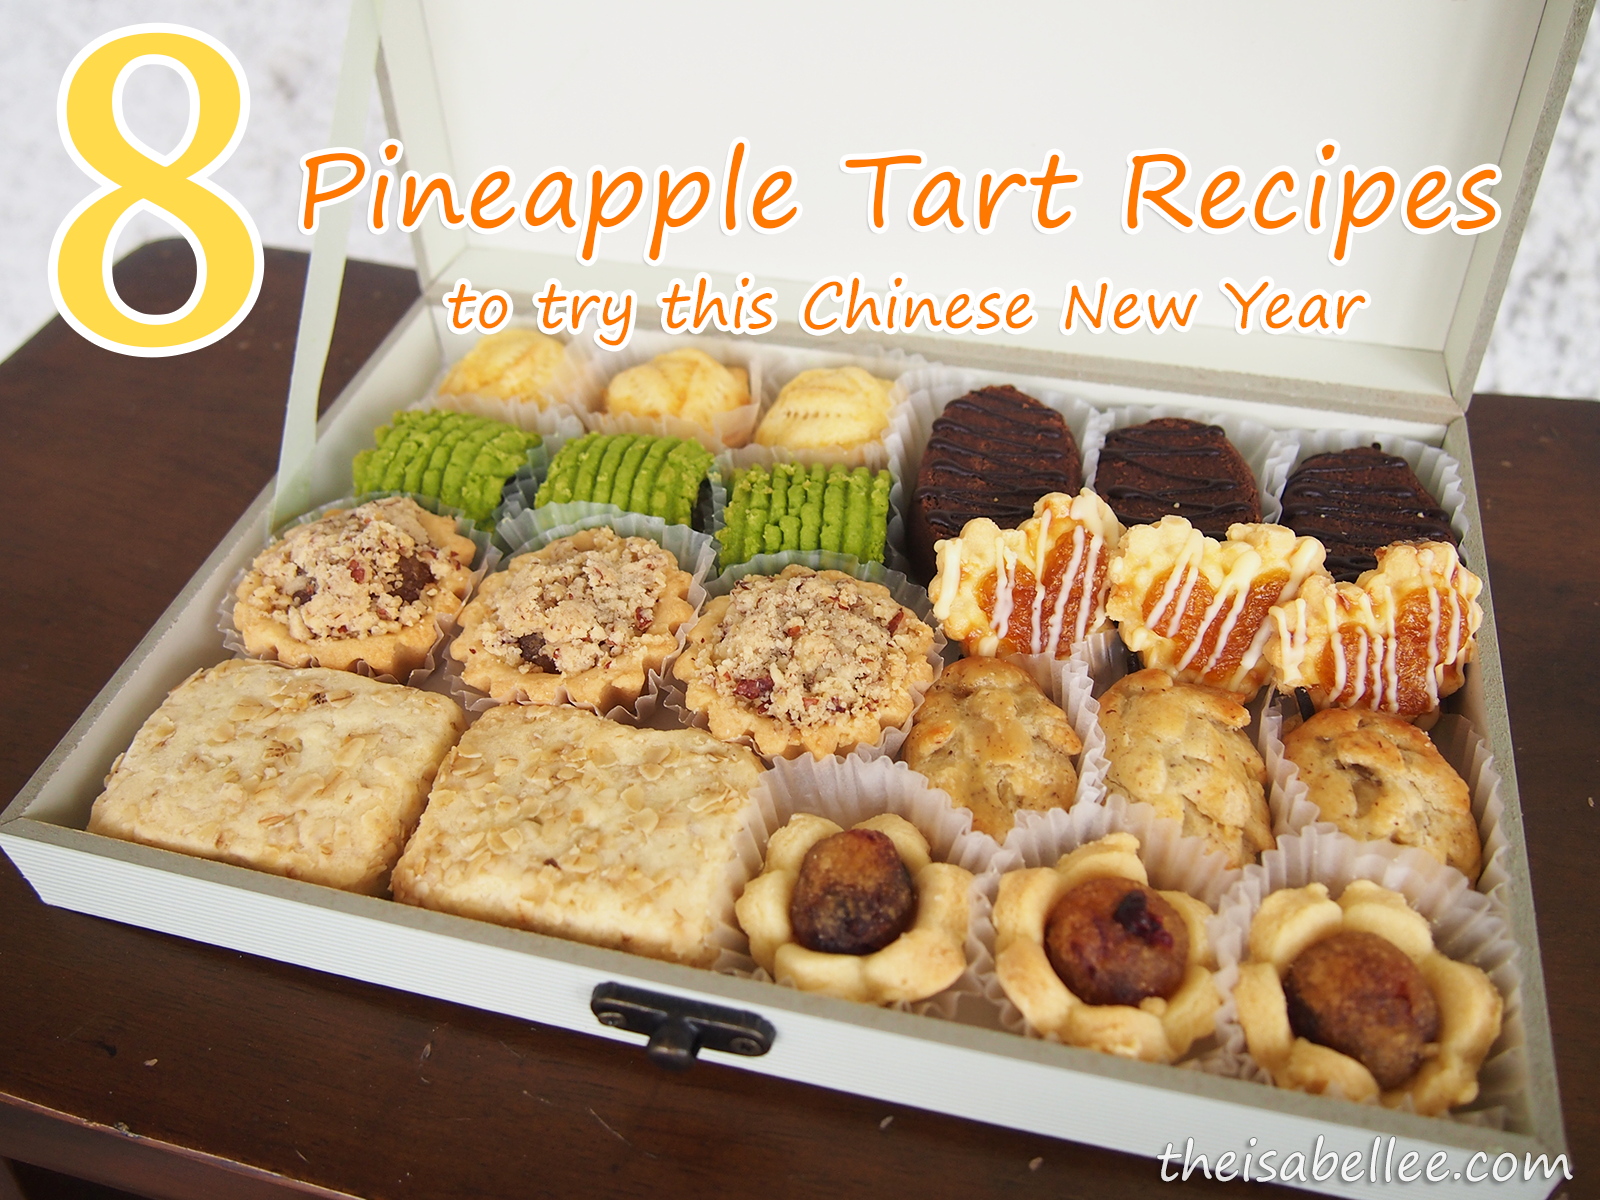 8 pineapple tart recipes to try this Chinese New Year